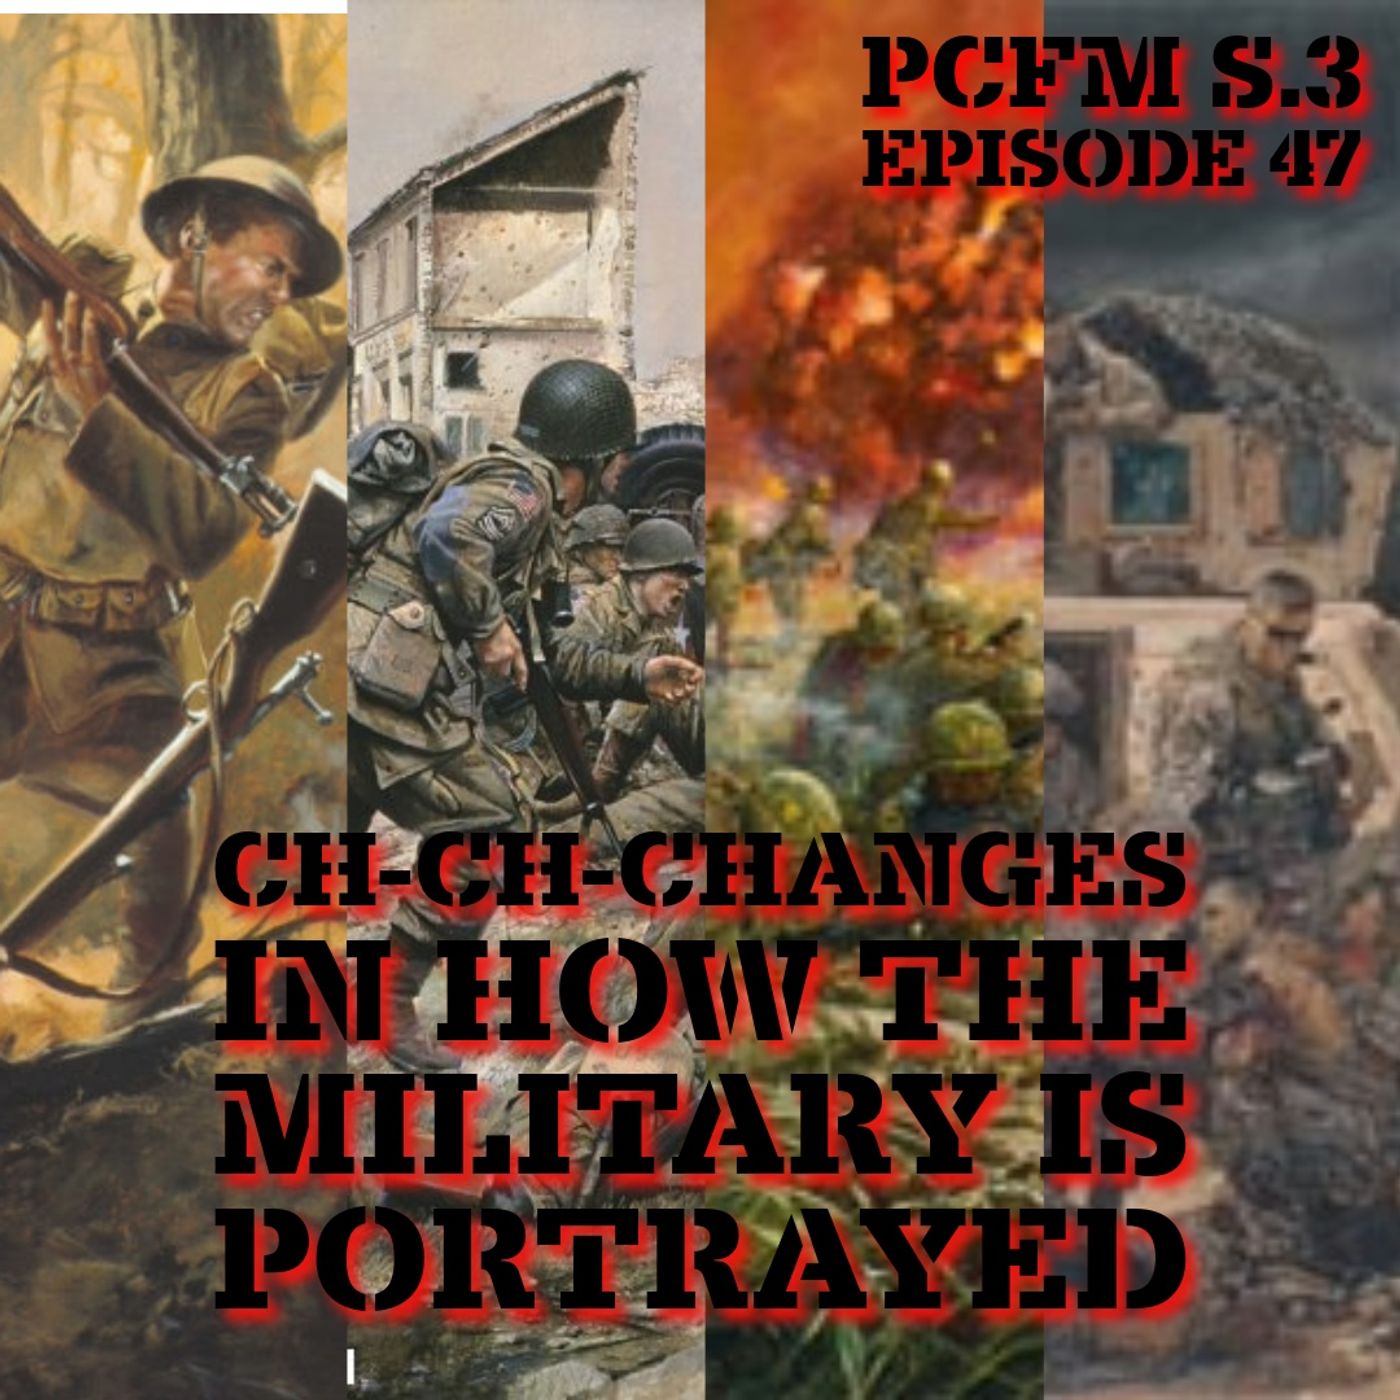 Ch-ch-changes in How The Military is Potrayed